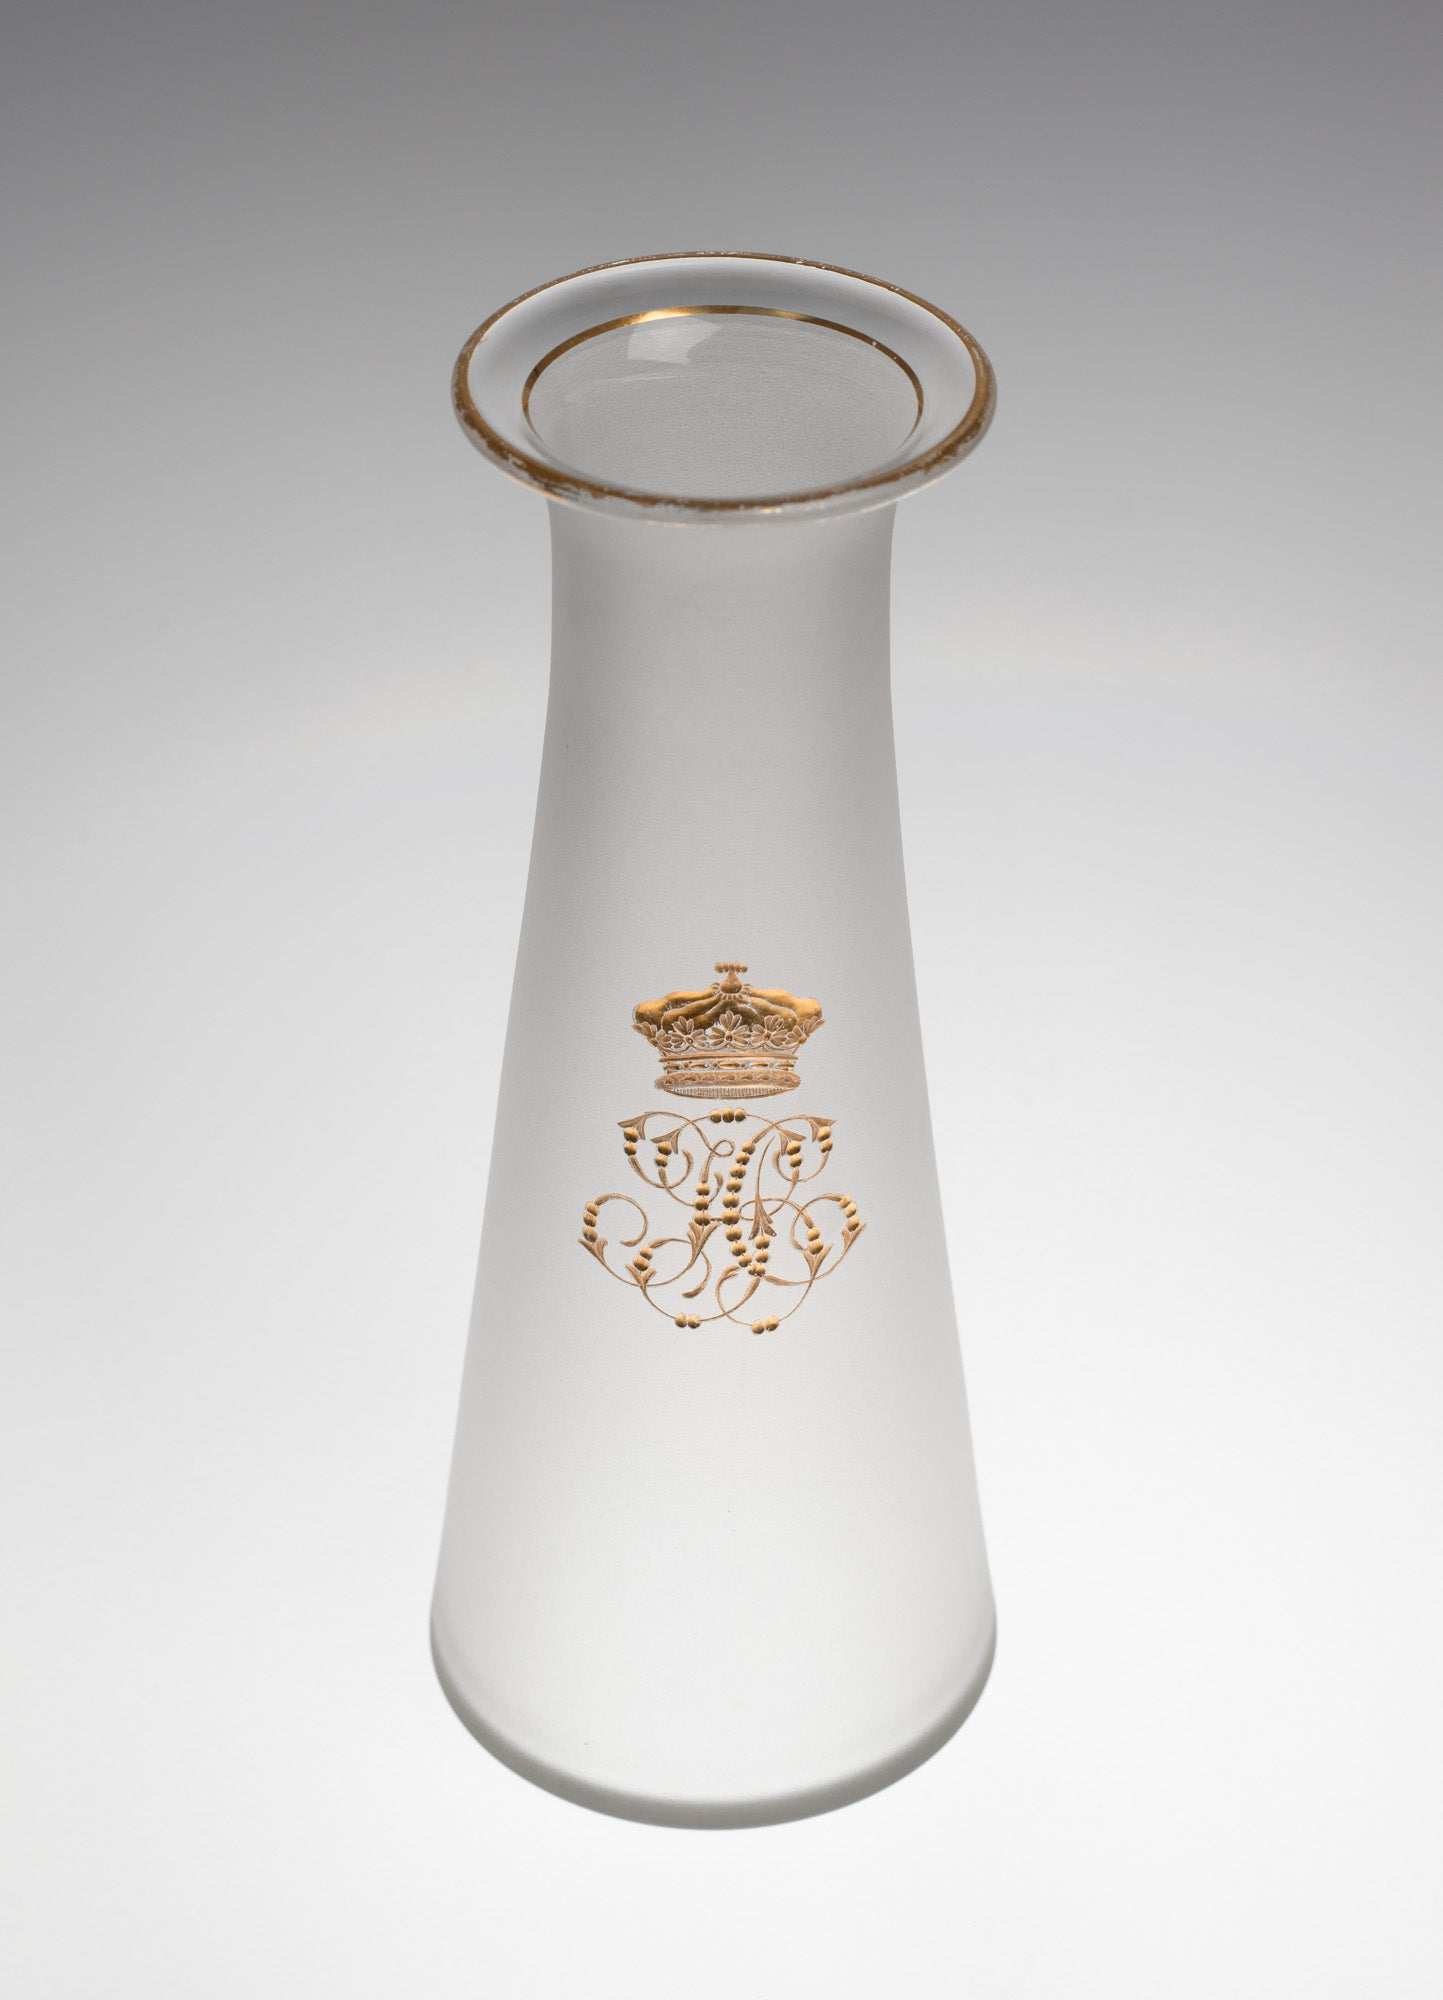 Antique Frosted Glass Carafe / Decanter with Russian Etched & Gilded Crown (Code 2372)